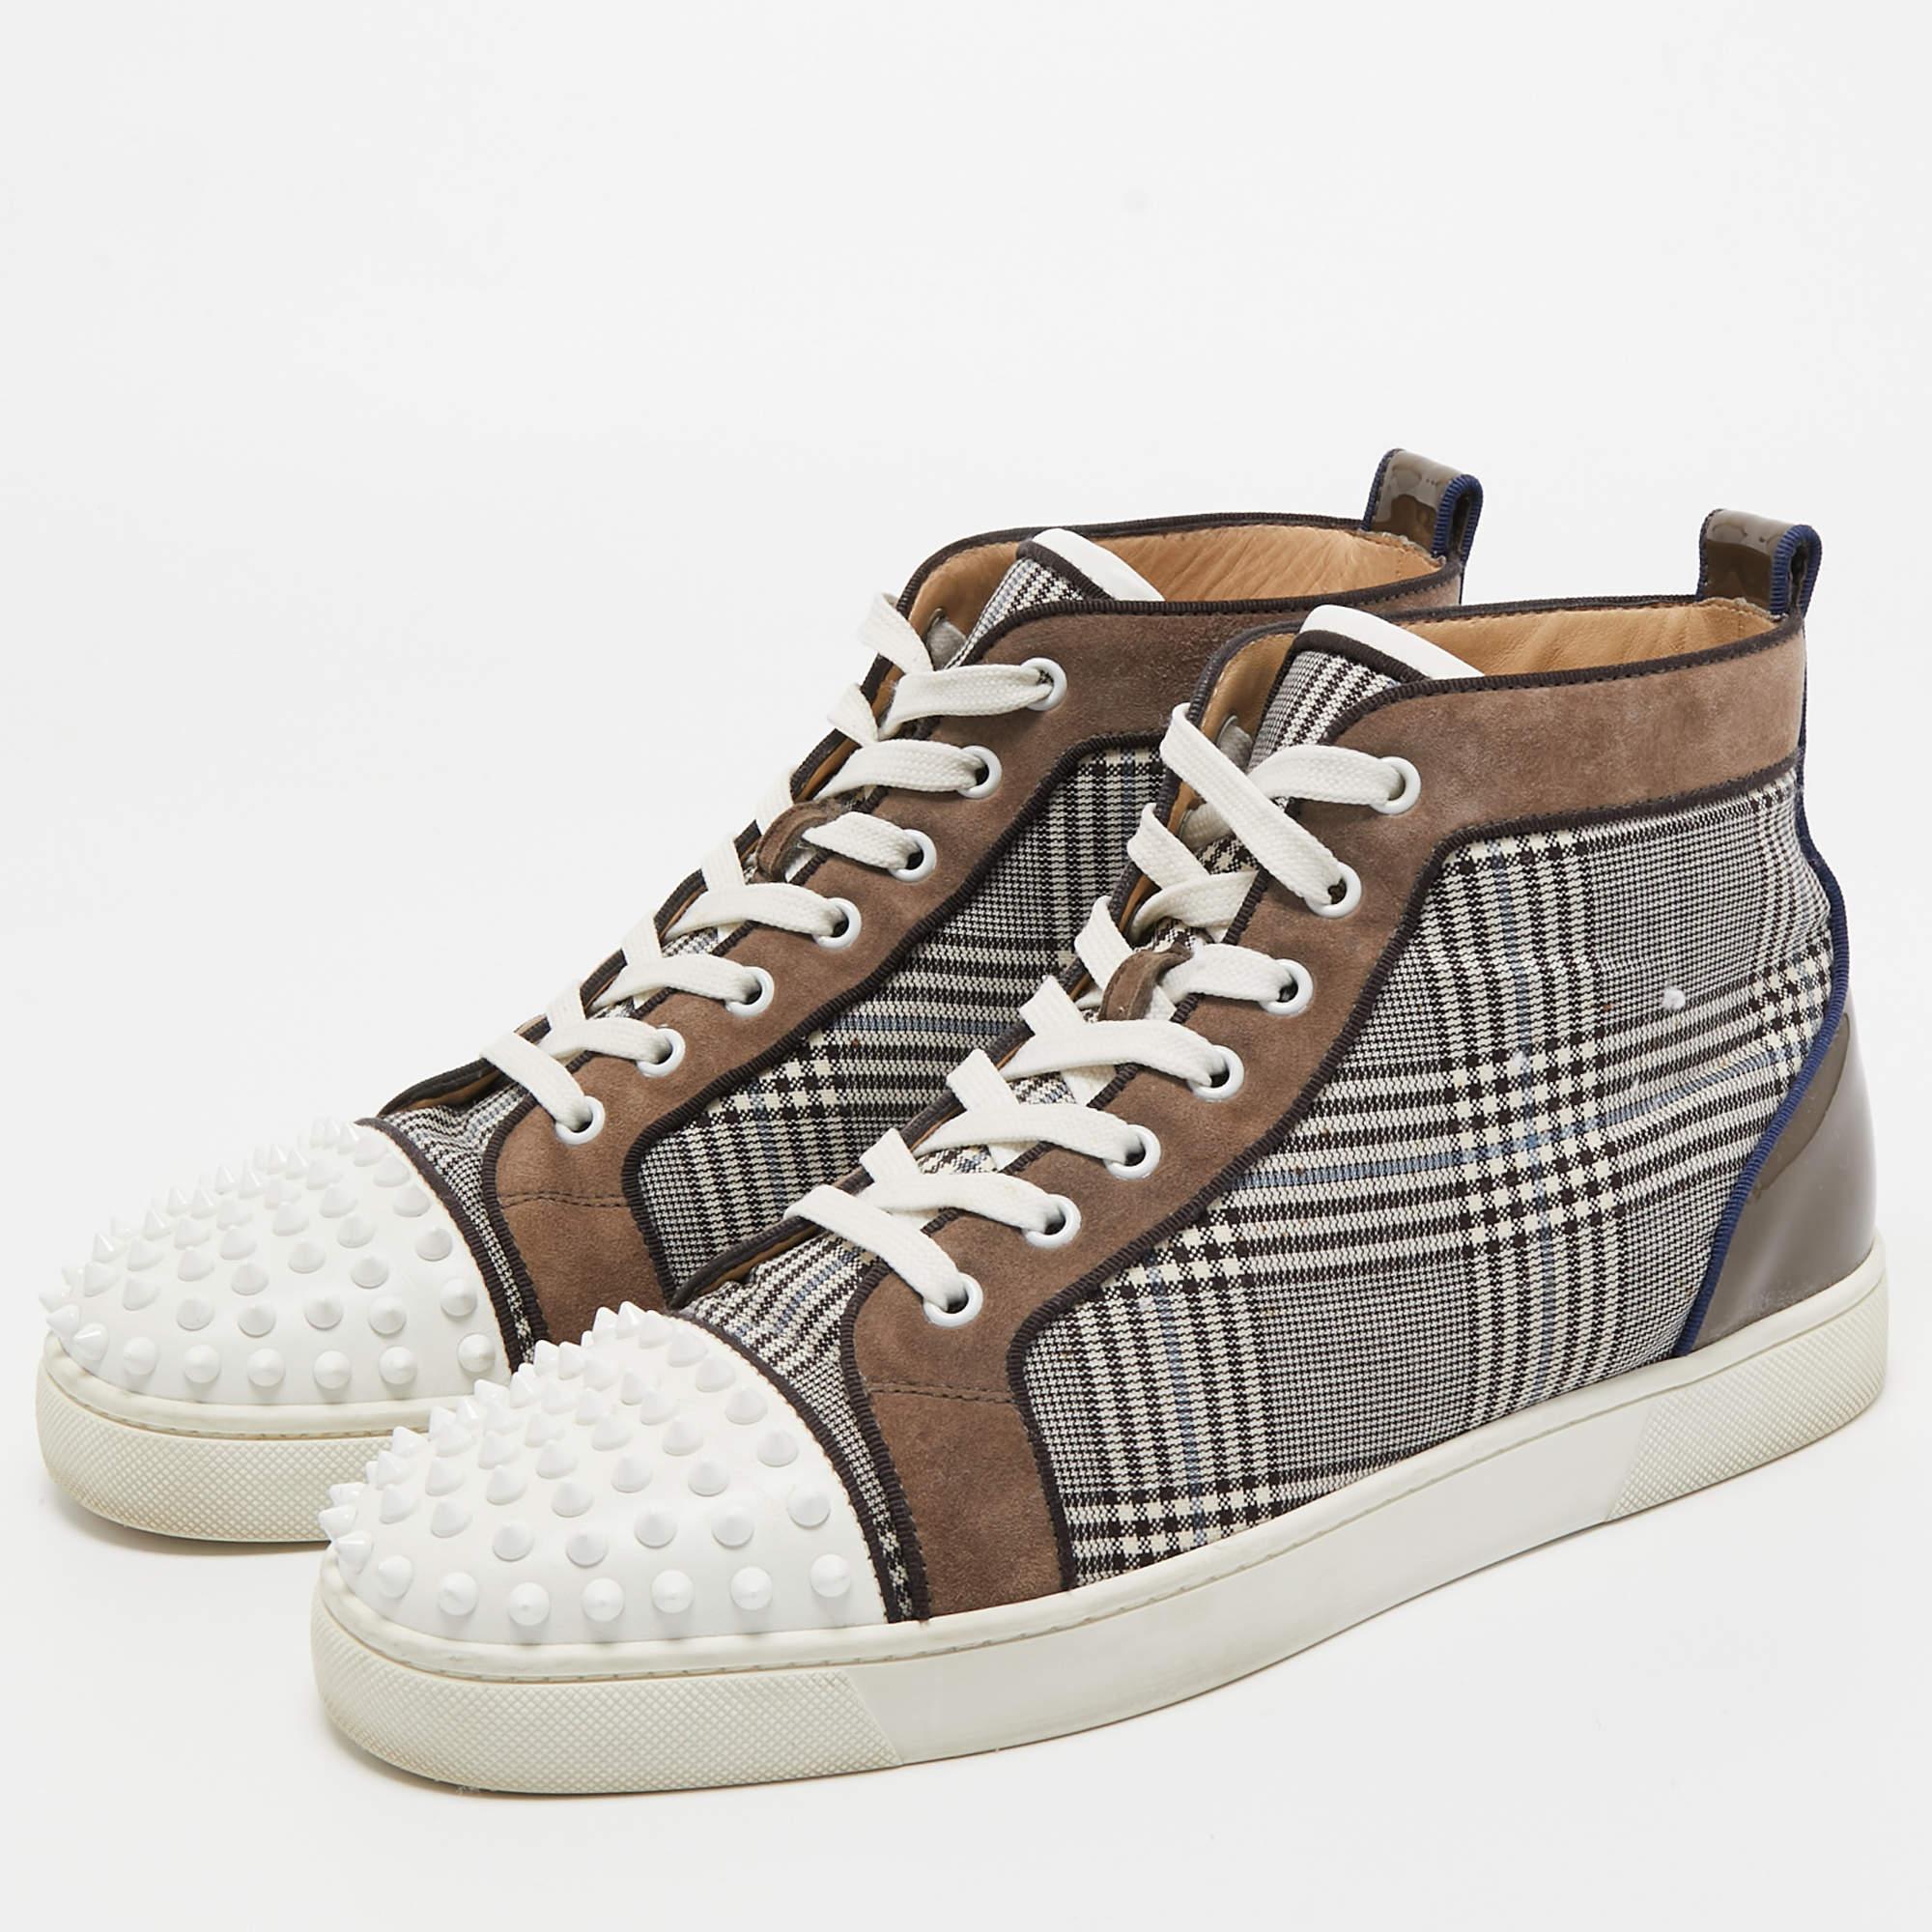 Christian Louboutin Multicolor Check Louis Spike High Top Sneakers Size 42.5 For Sale 2